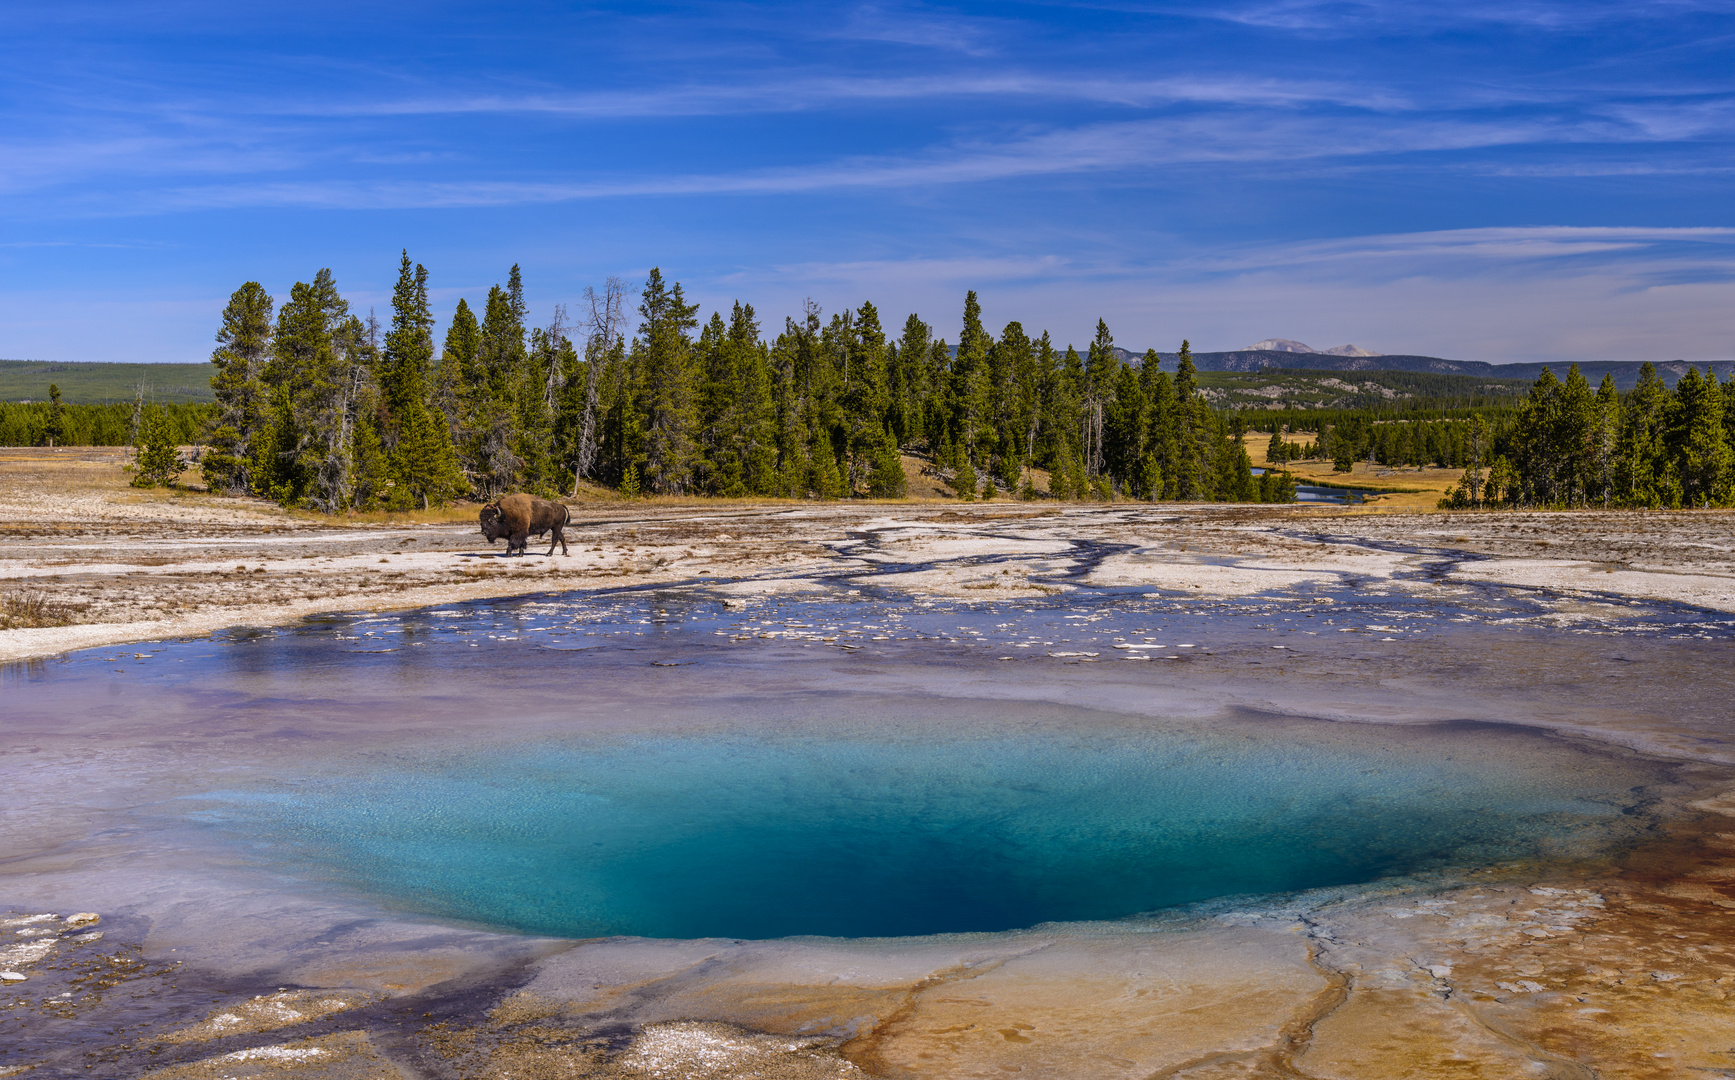 Bisonbulle am Opal Pool, Yellowstone NP, Wyoming, USA